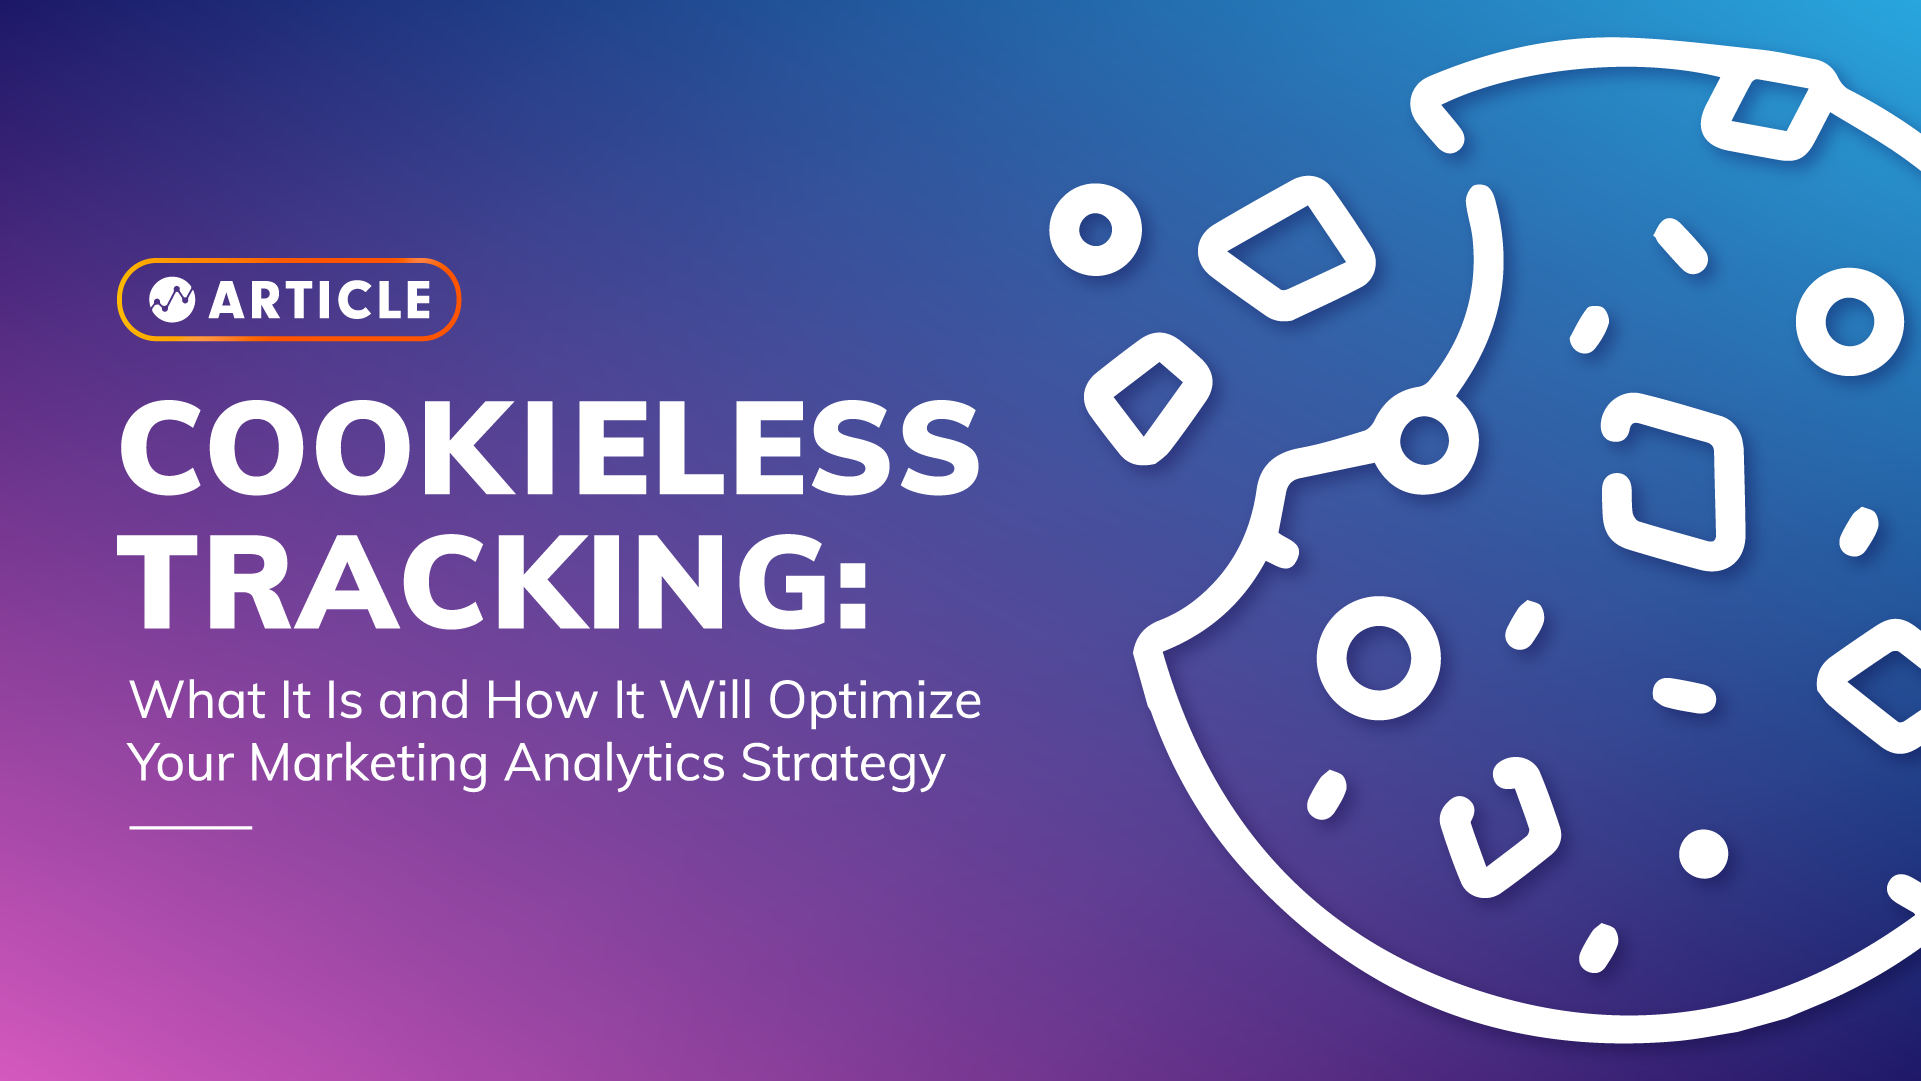 Cookieless Tracking: What It Is and How It Will Optimize Your Marketing Analytics Strategy